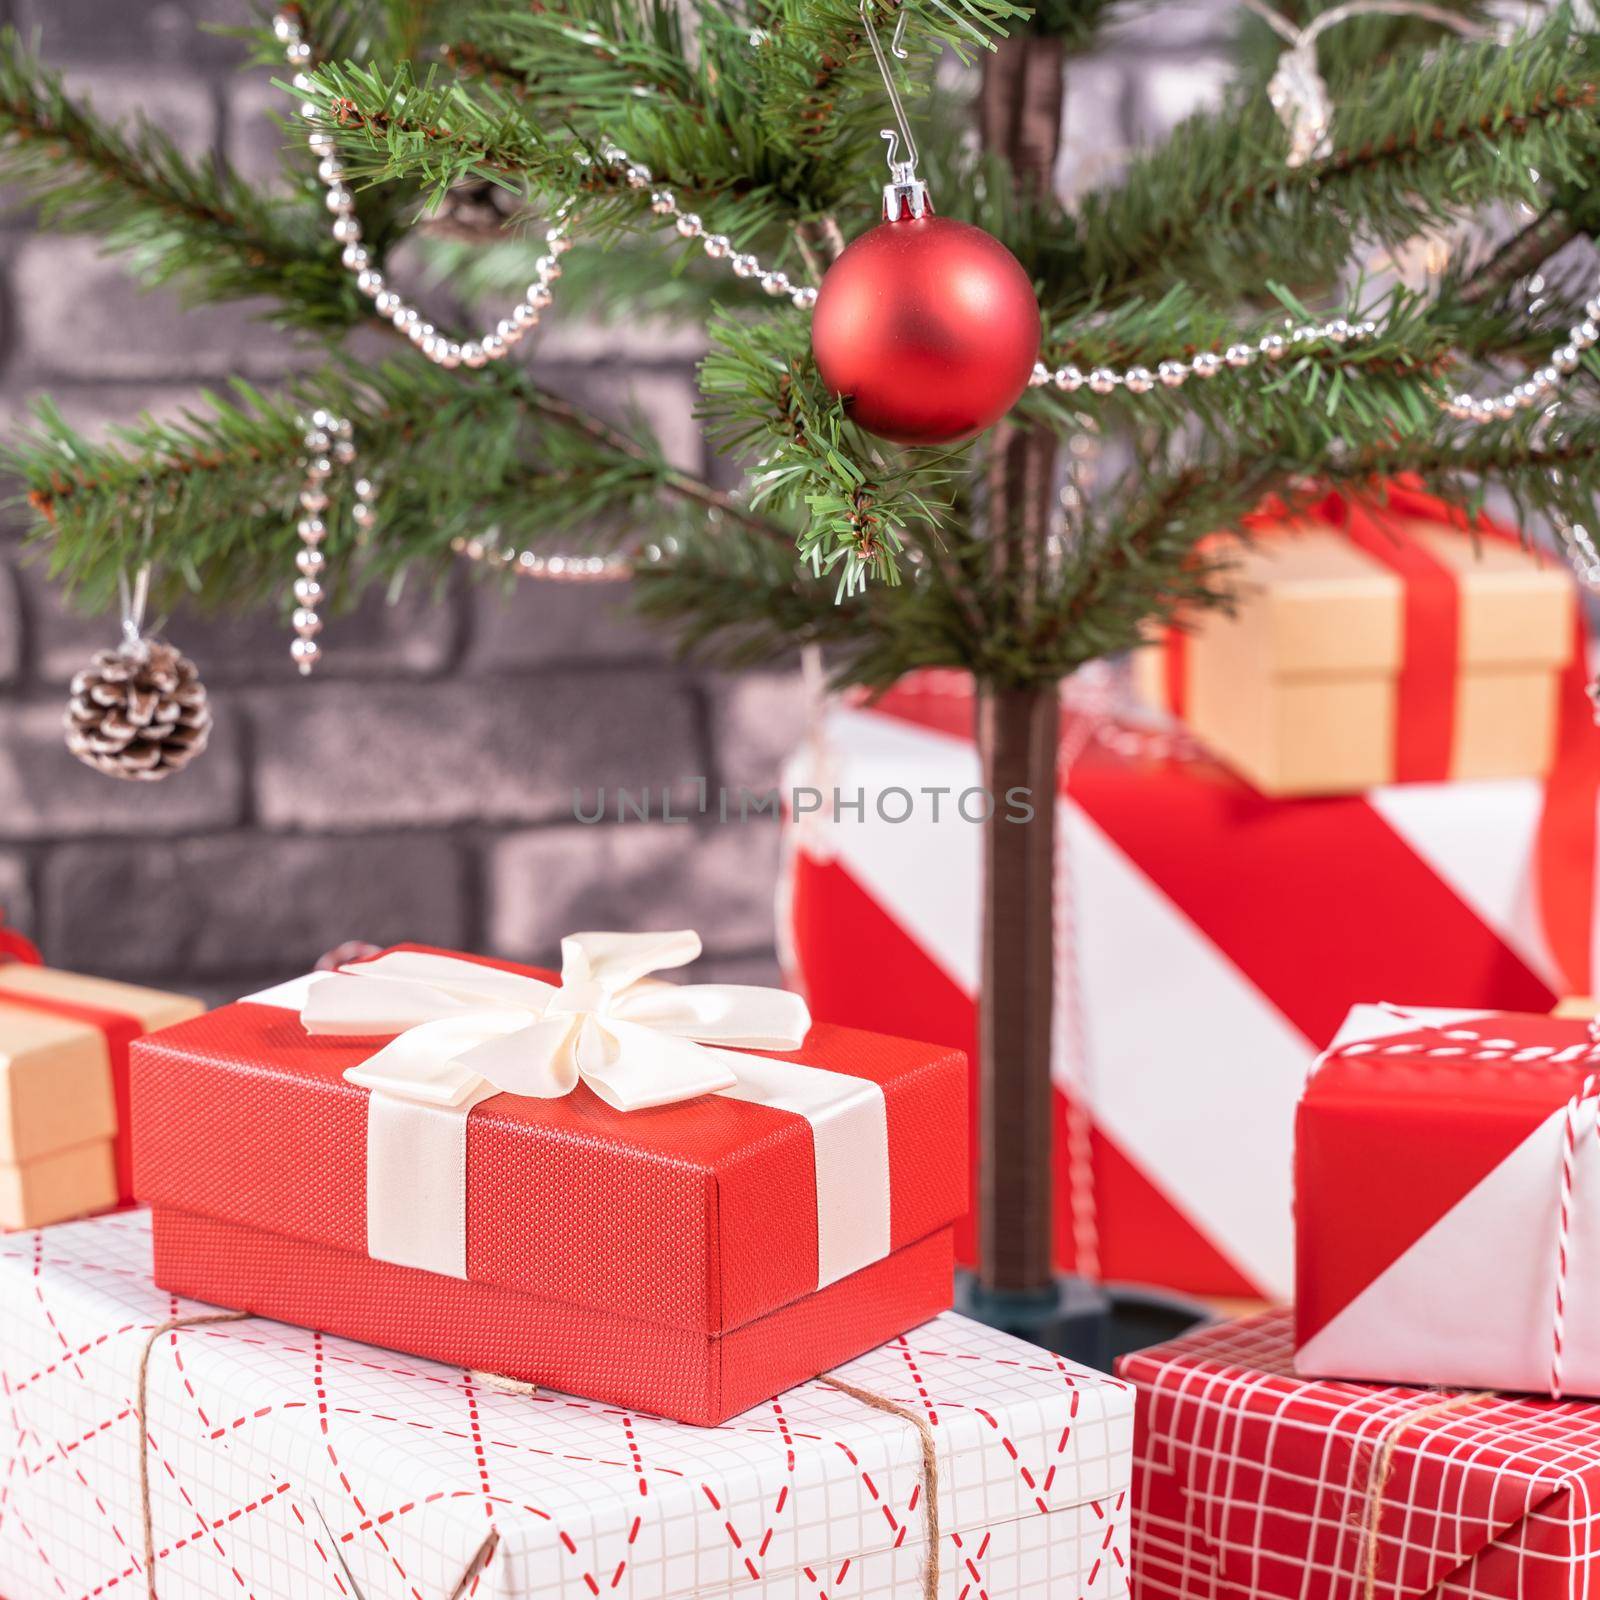 Decorated Christmas tree with wrapped beautiful red and white gifts at home with black brick wall, festive design concept, close up.